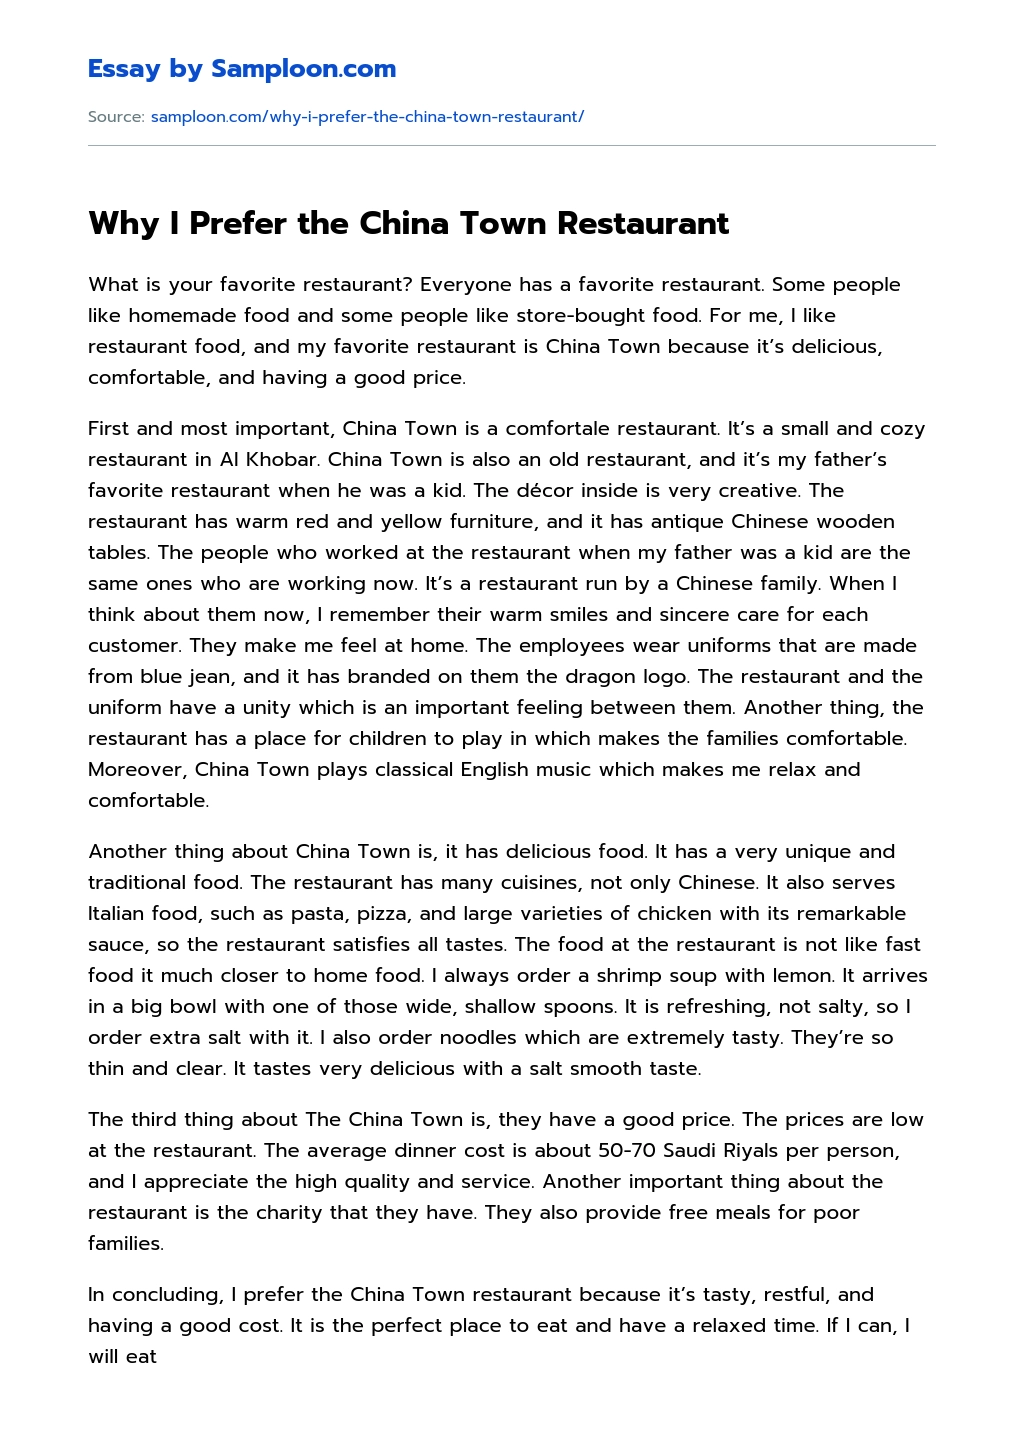 Why I Prefer the China Town Restaurant essay